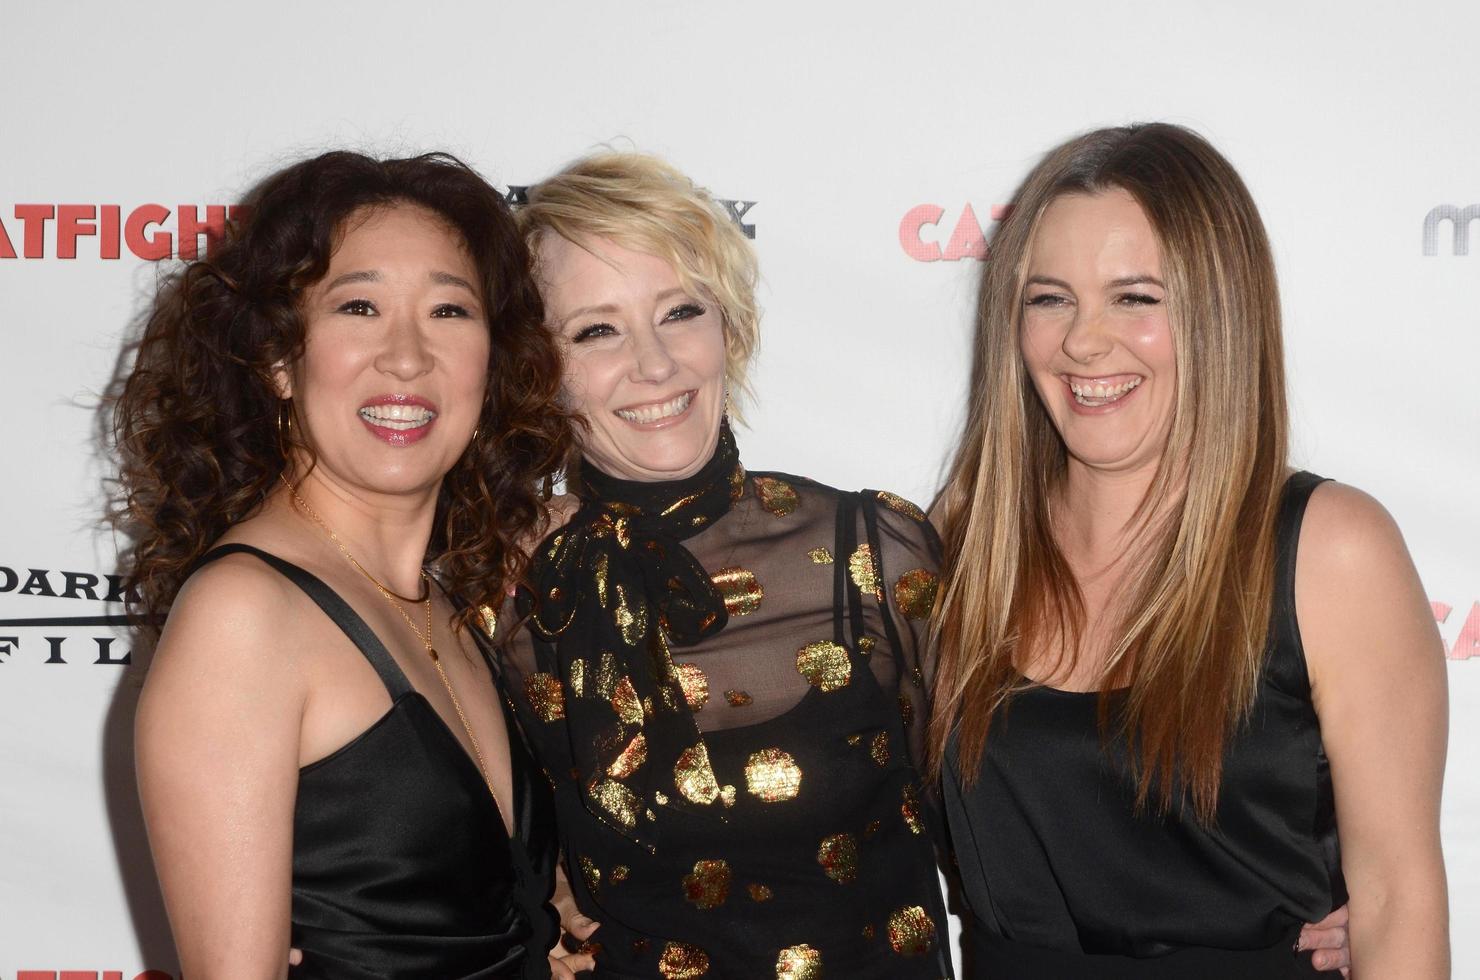 LOS ANGELES - MAR 2 - Sandra Oh, Anne Heche, Alicia Silverstone at the Catfight Los Angeles Premiere at the Cinefamily Theater on March 2, 2017 in Los Angeles, CA photo